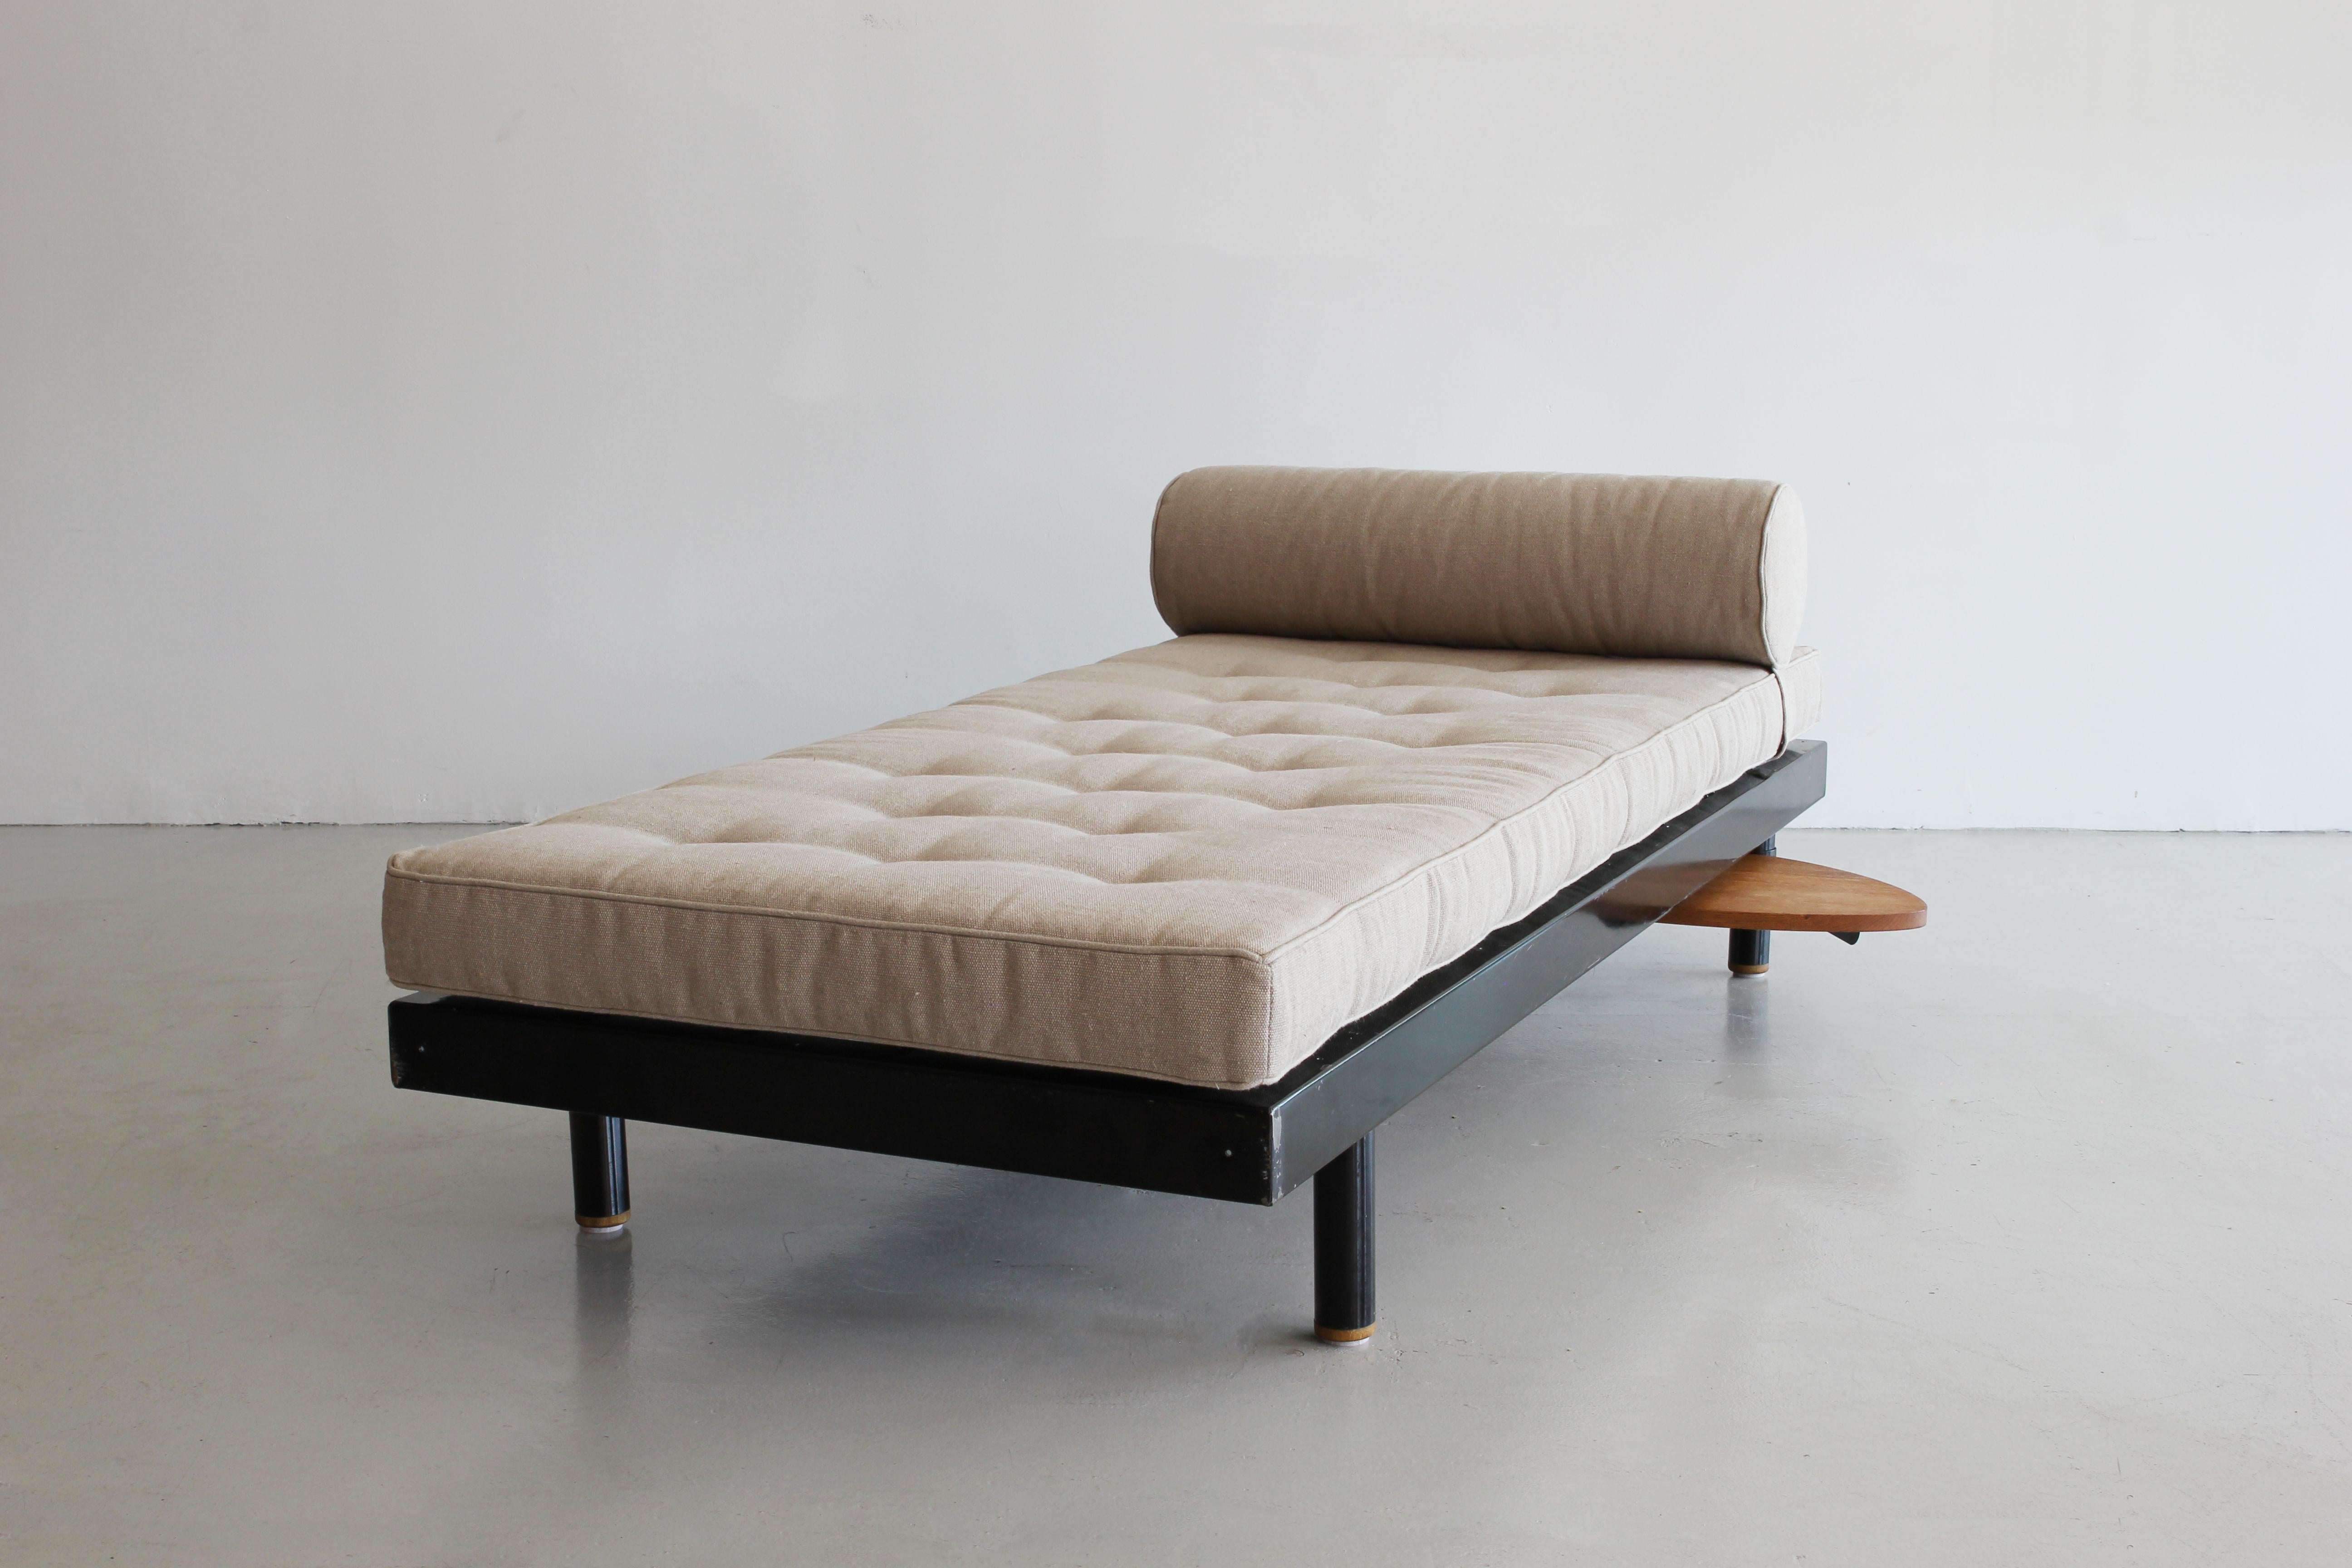 S.C.A.L. Antony daybed with pivoting table designed by Jean Prouvé and Charlotte Perriand. Manufactured by Ateliers Prouvé, France, circa 1952.